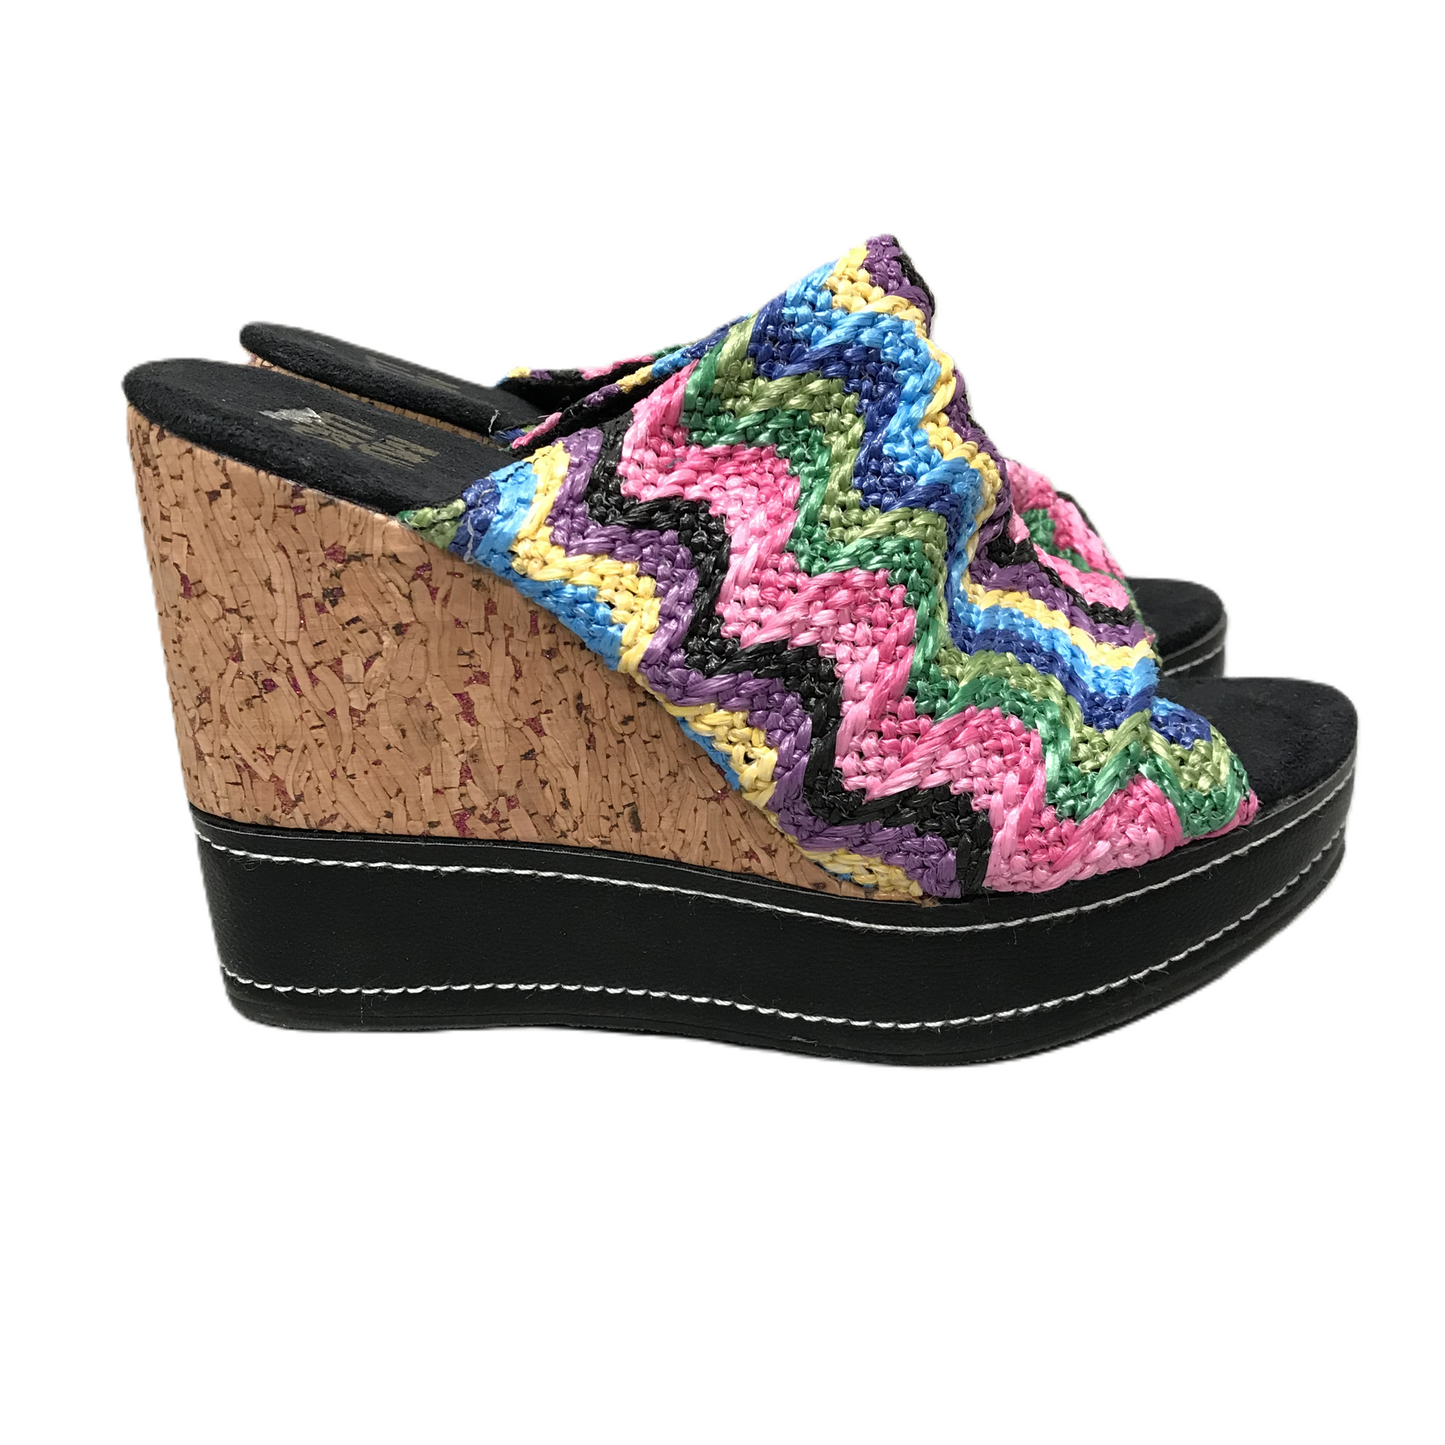 Multi-colored Sandals Heels Wedge By Muk Luks, Size: 8